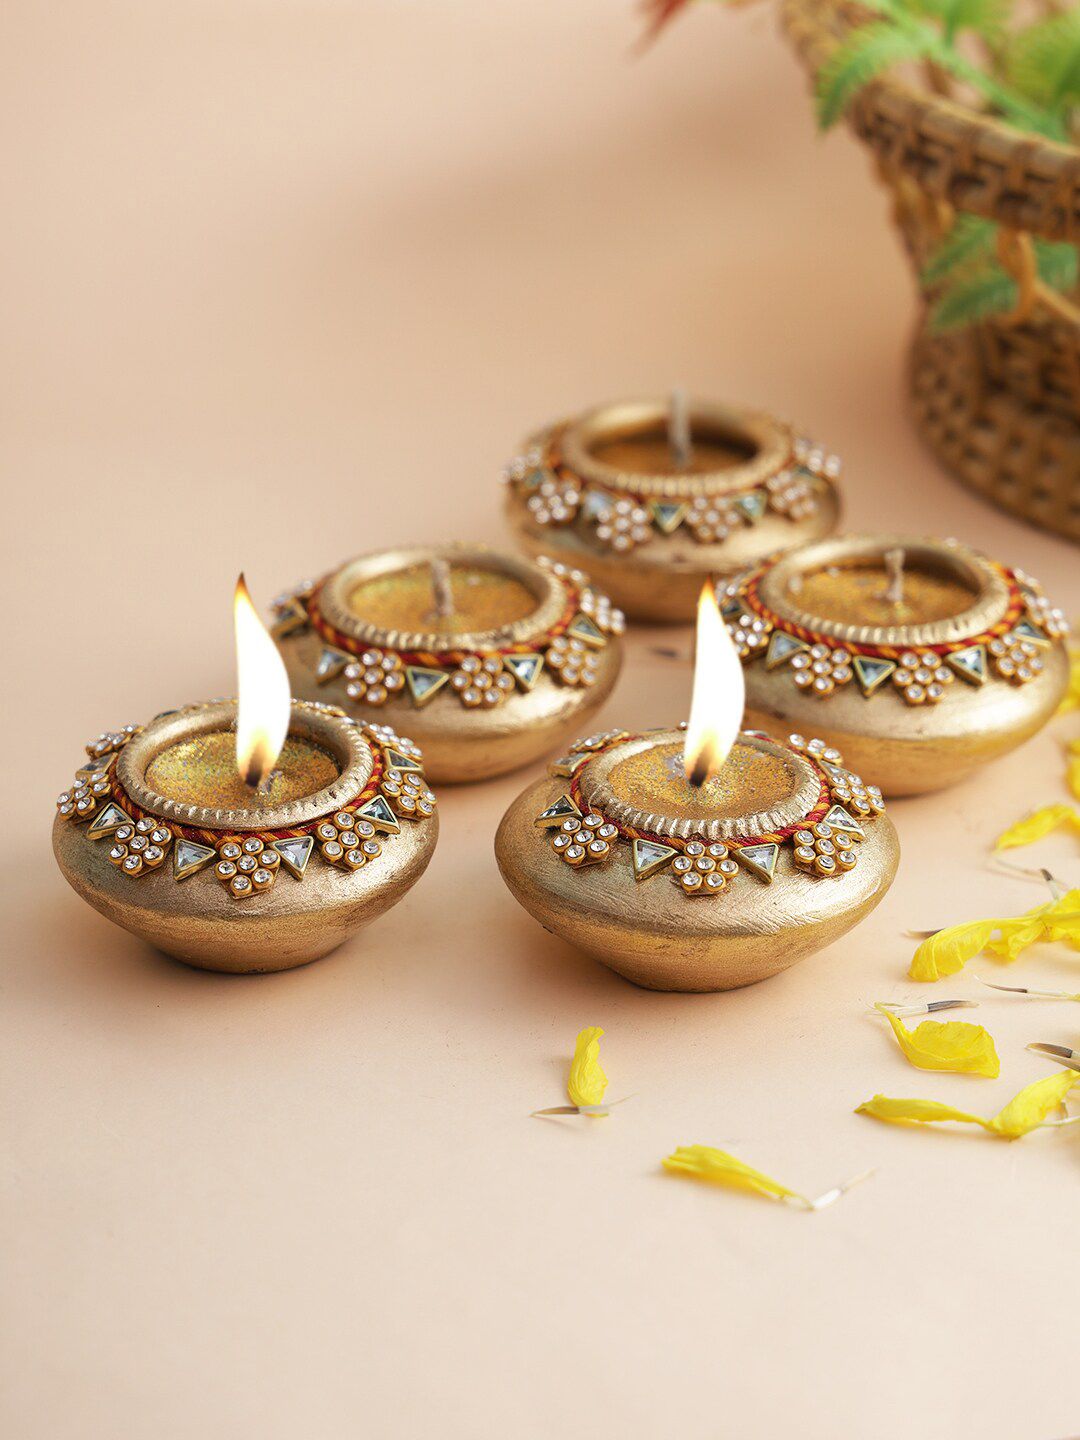 Aapno Rajasthan Set Of 5 Gold-Toned Handmade Terracotta Diyas With Gel Filling Price in India